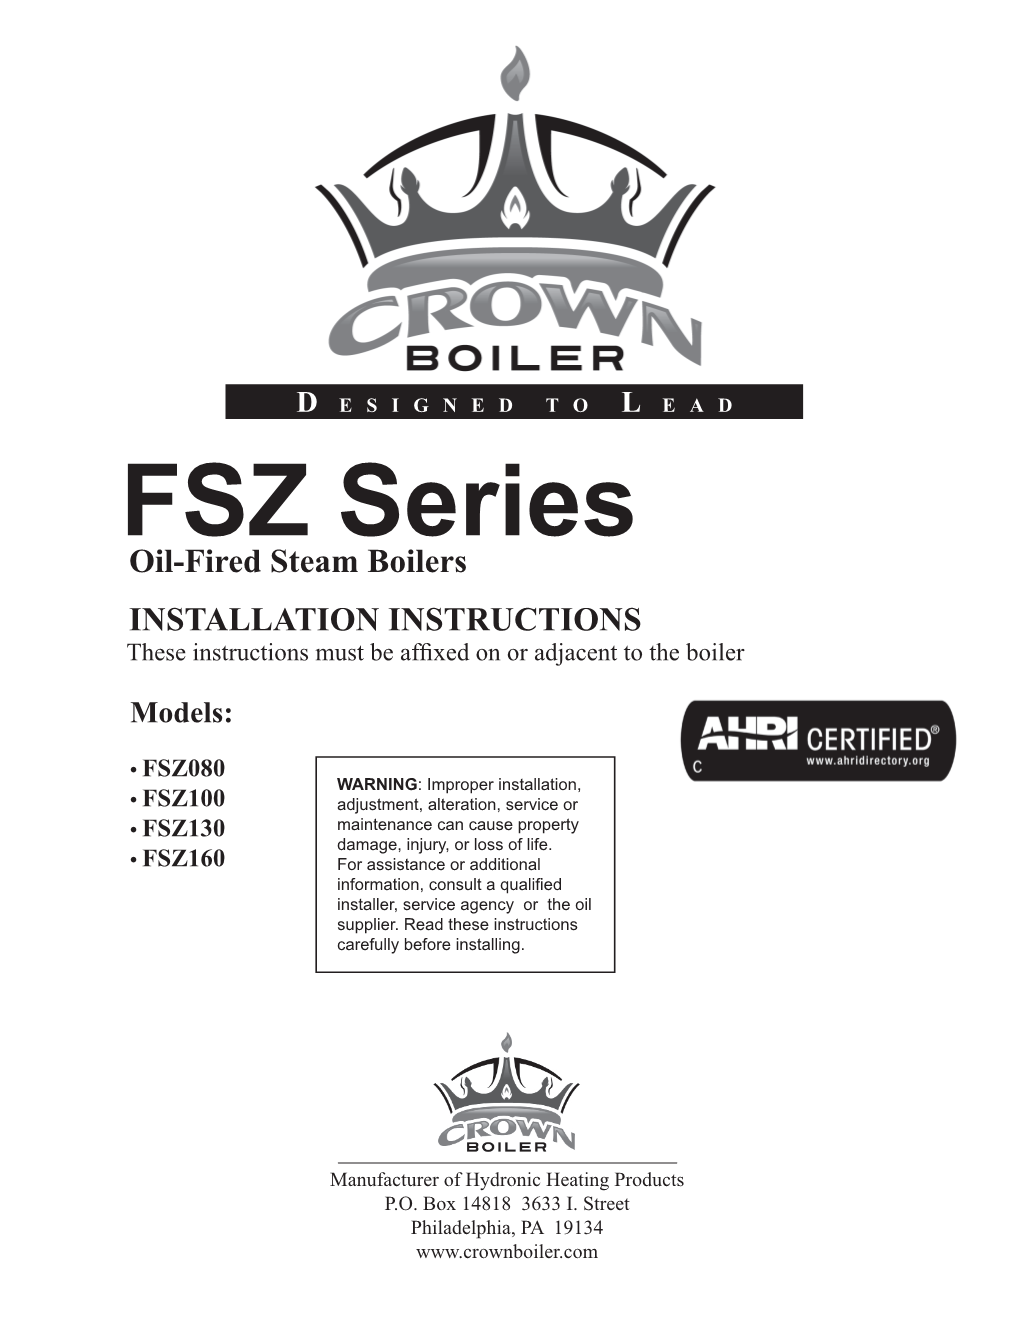 FSZ Series Boiler Is a Cast Iron Oil-Fired Steam Boiler Designed for Use in Closed Heating Systems